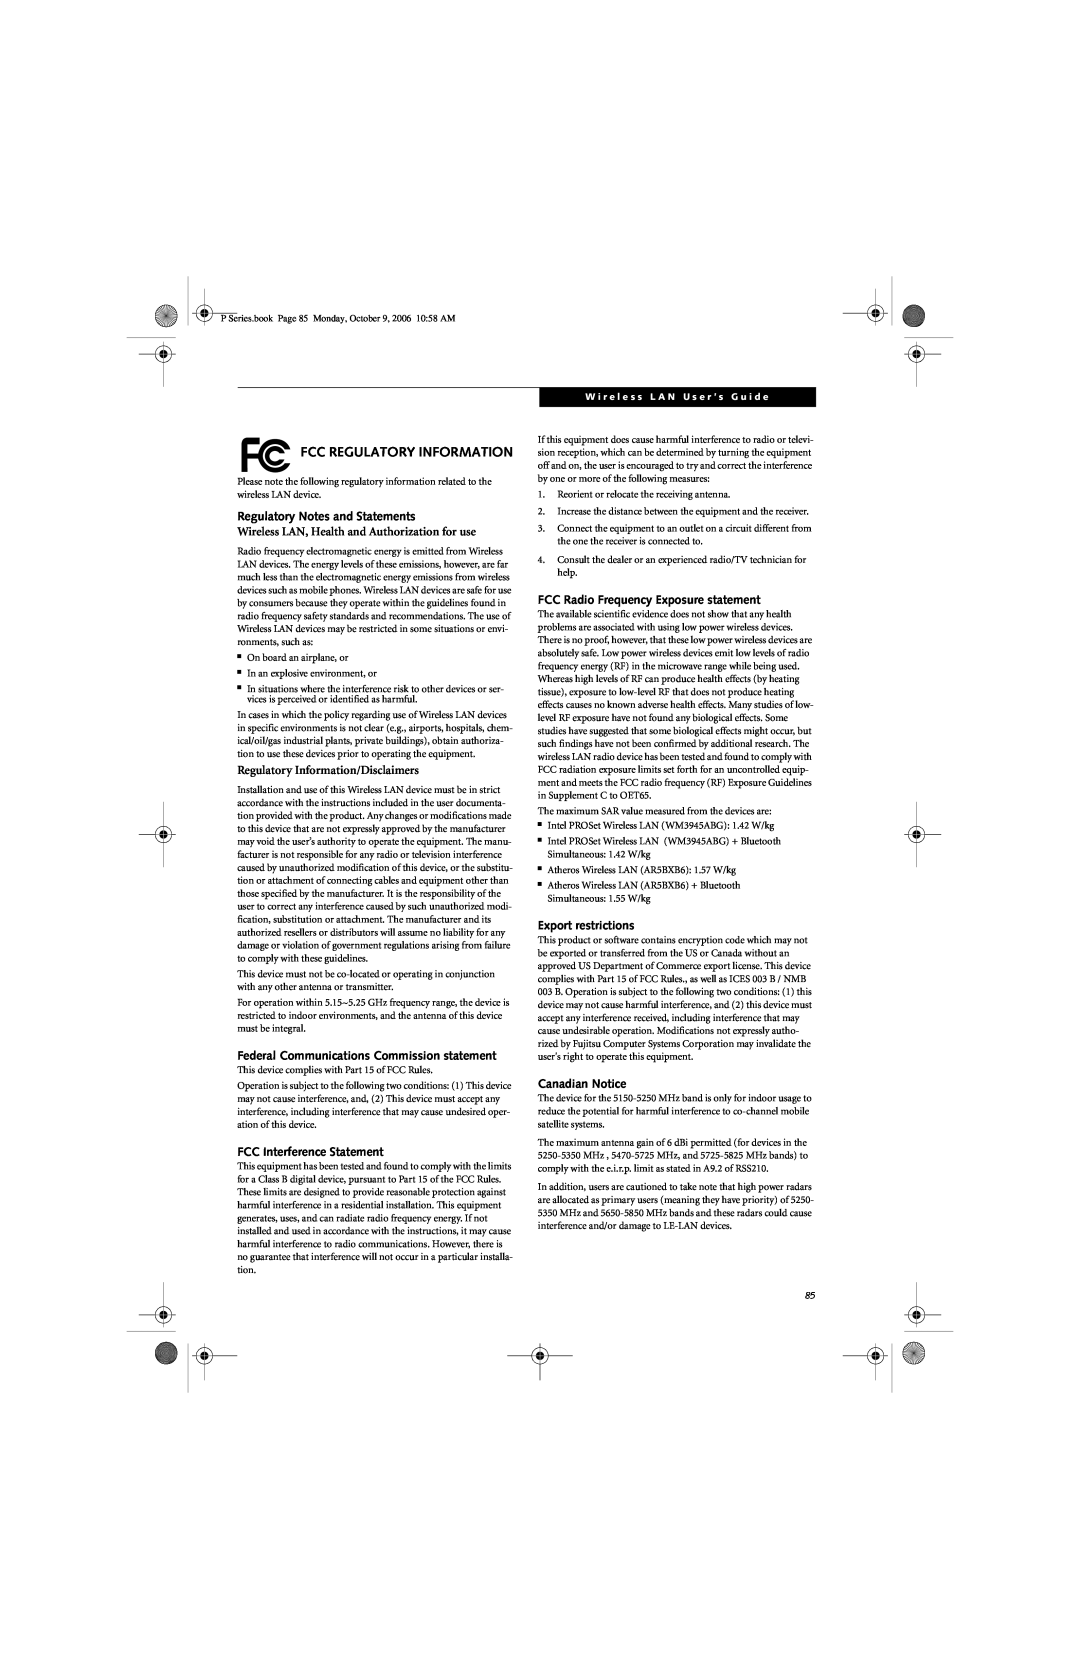 Fujitsu P1610 Fcc Regulatory Information, Regulatory Notes and Statements, Wireless LAN, Health and Authorization for use 